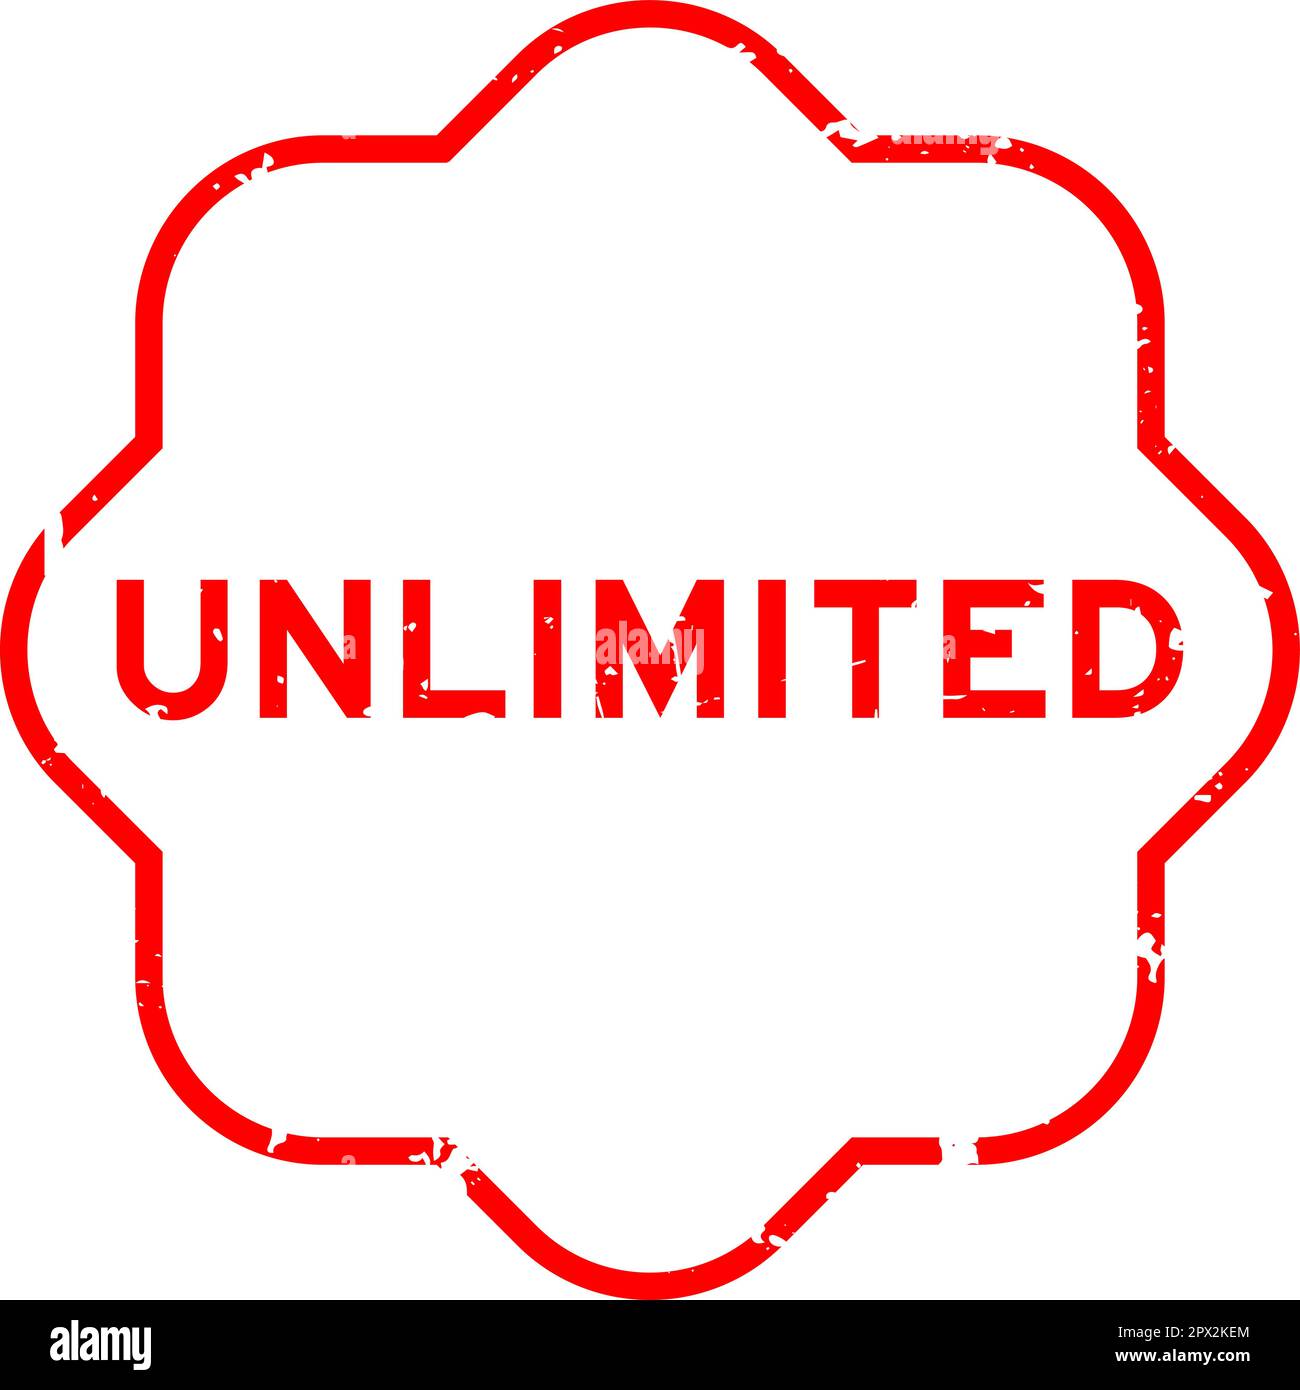 Grunge red unlimited word rubber seal stamp on white background Stock Vector